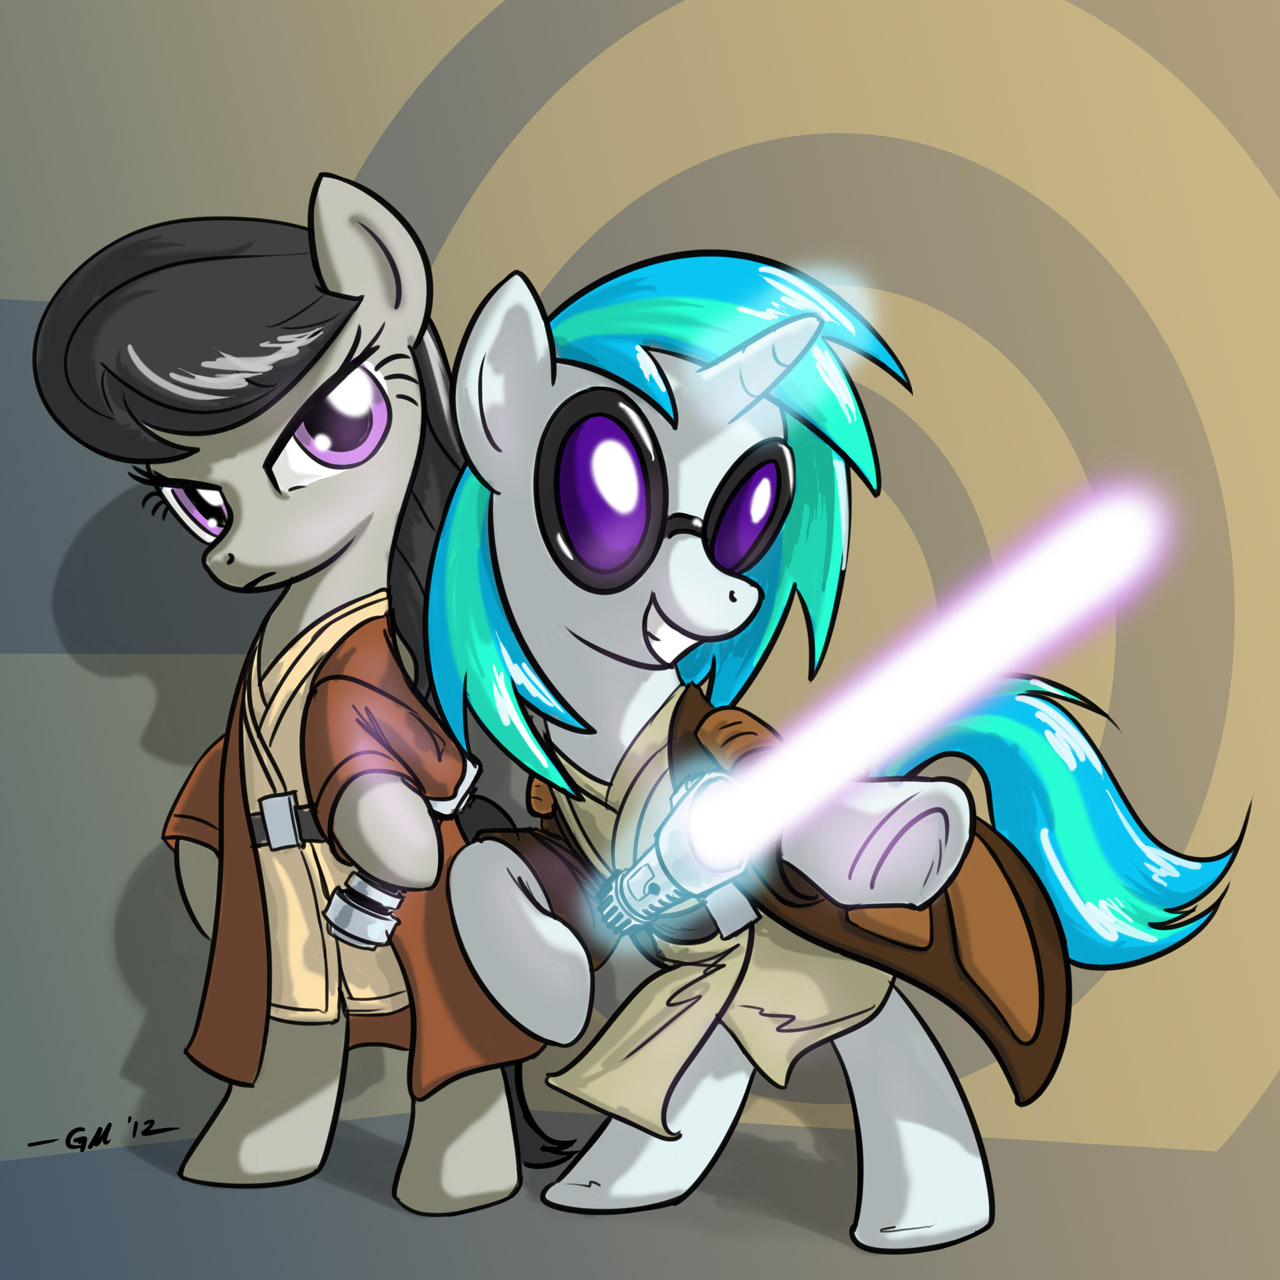 Funny pictures, videos and other media thread! - Page 15 196834+-+artist+giantmosquito+jedi+Octavia+Star_Wars+vinyl_scratch